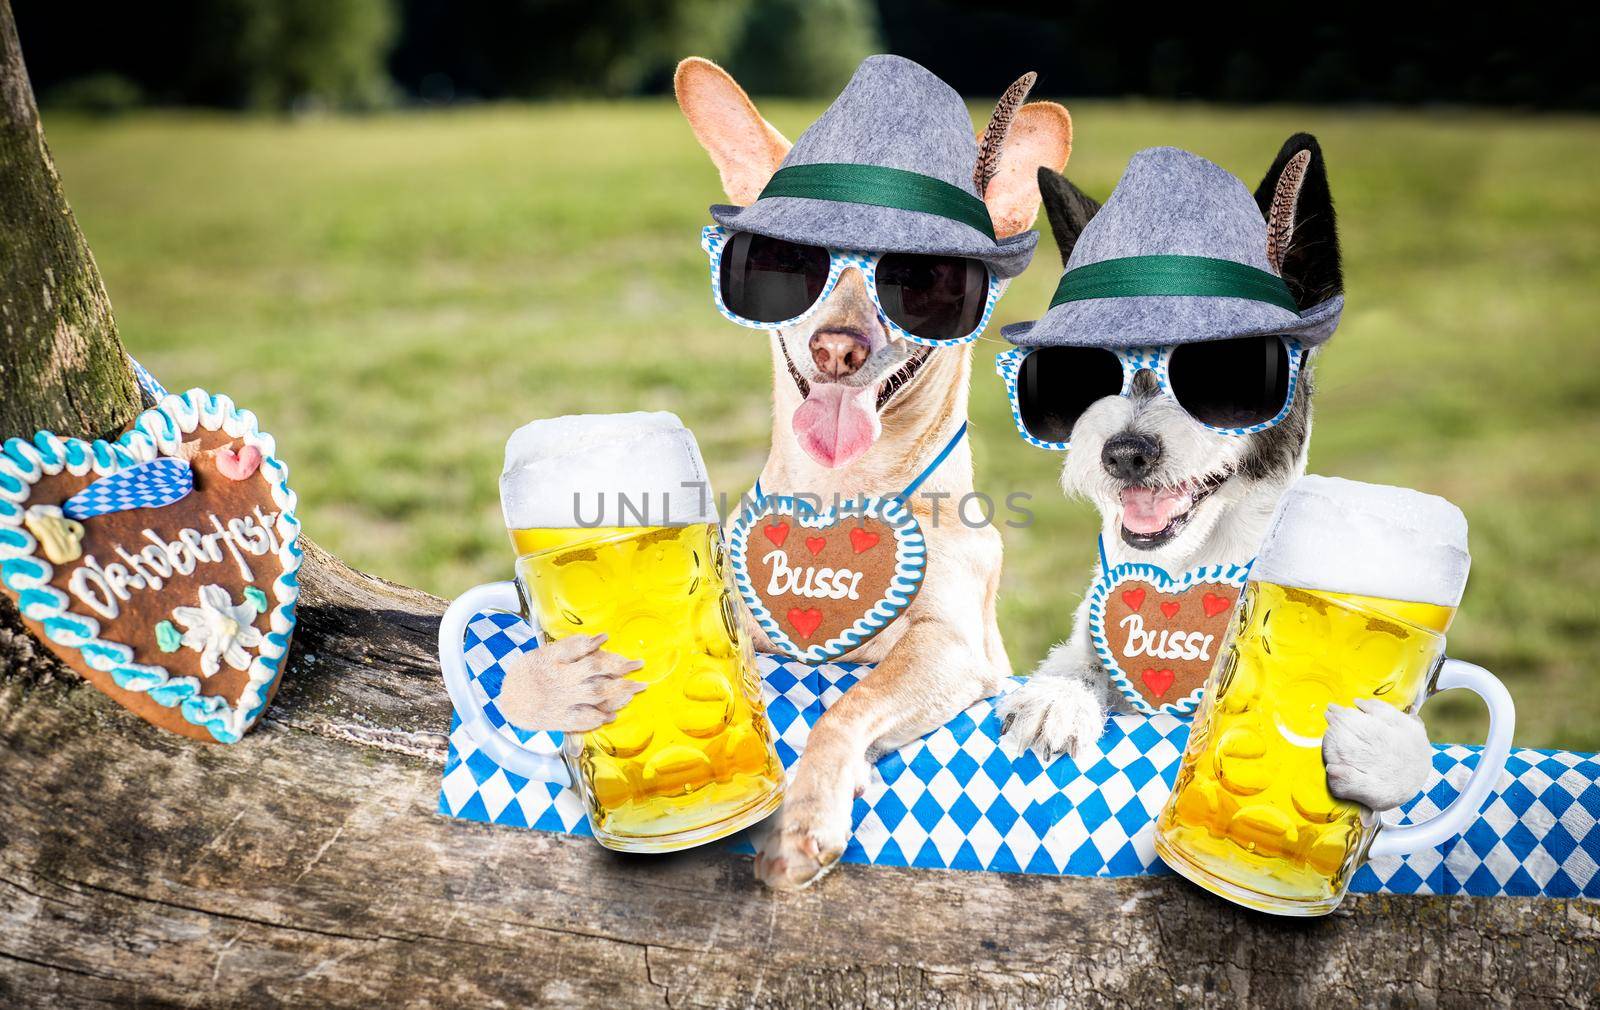 bavarian couple of  dogs  holding  a beer mug  outdoors by the river and mountains  , ready for the beer party celebration festival in munich